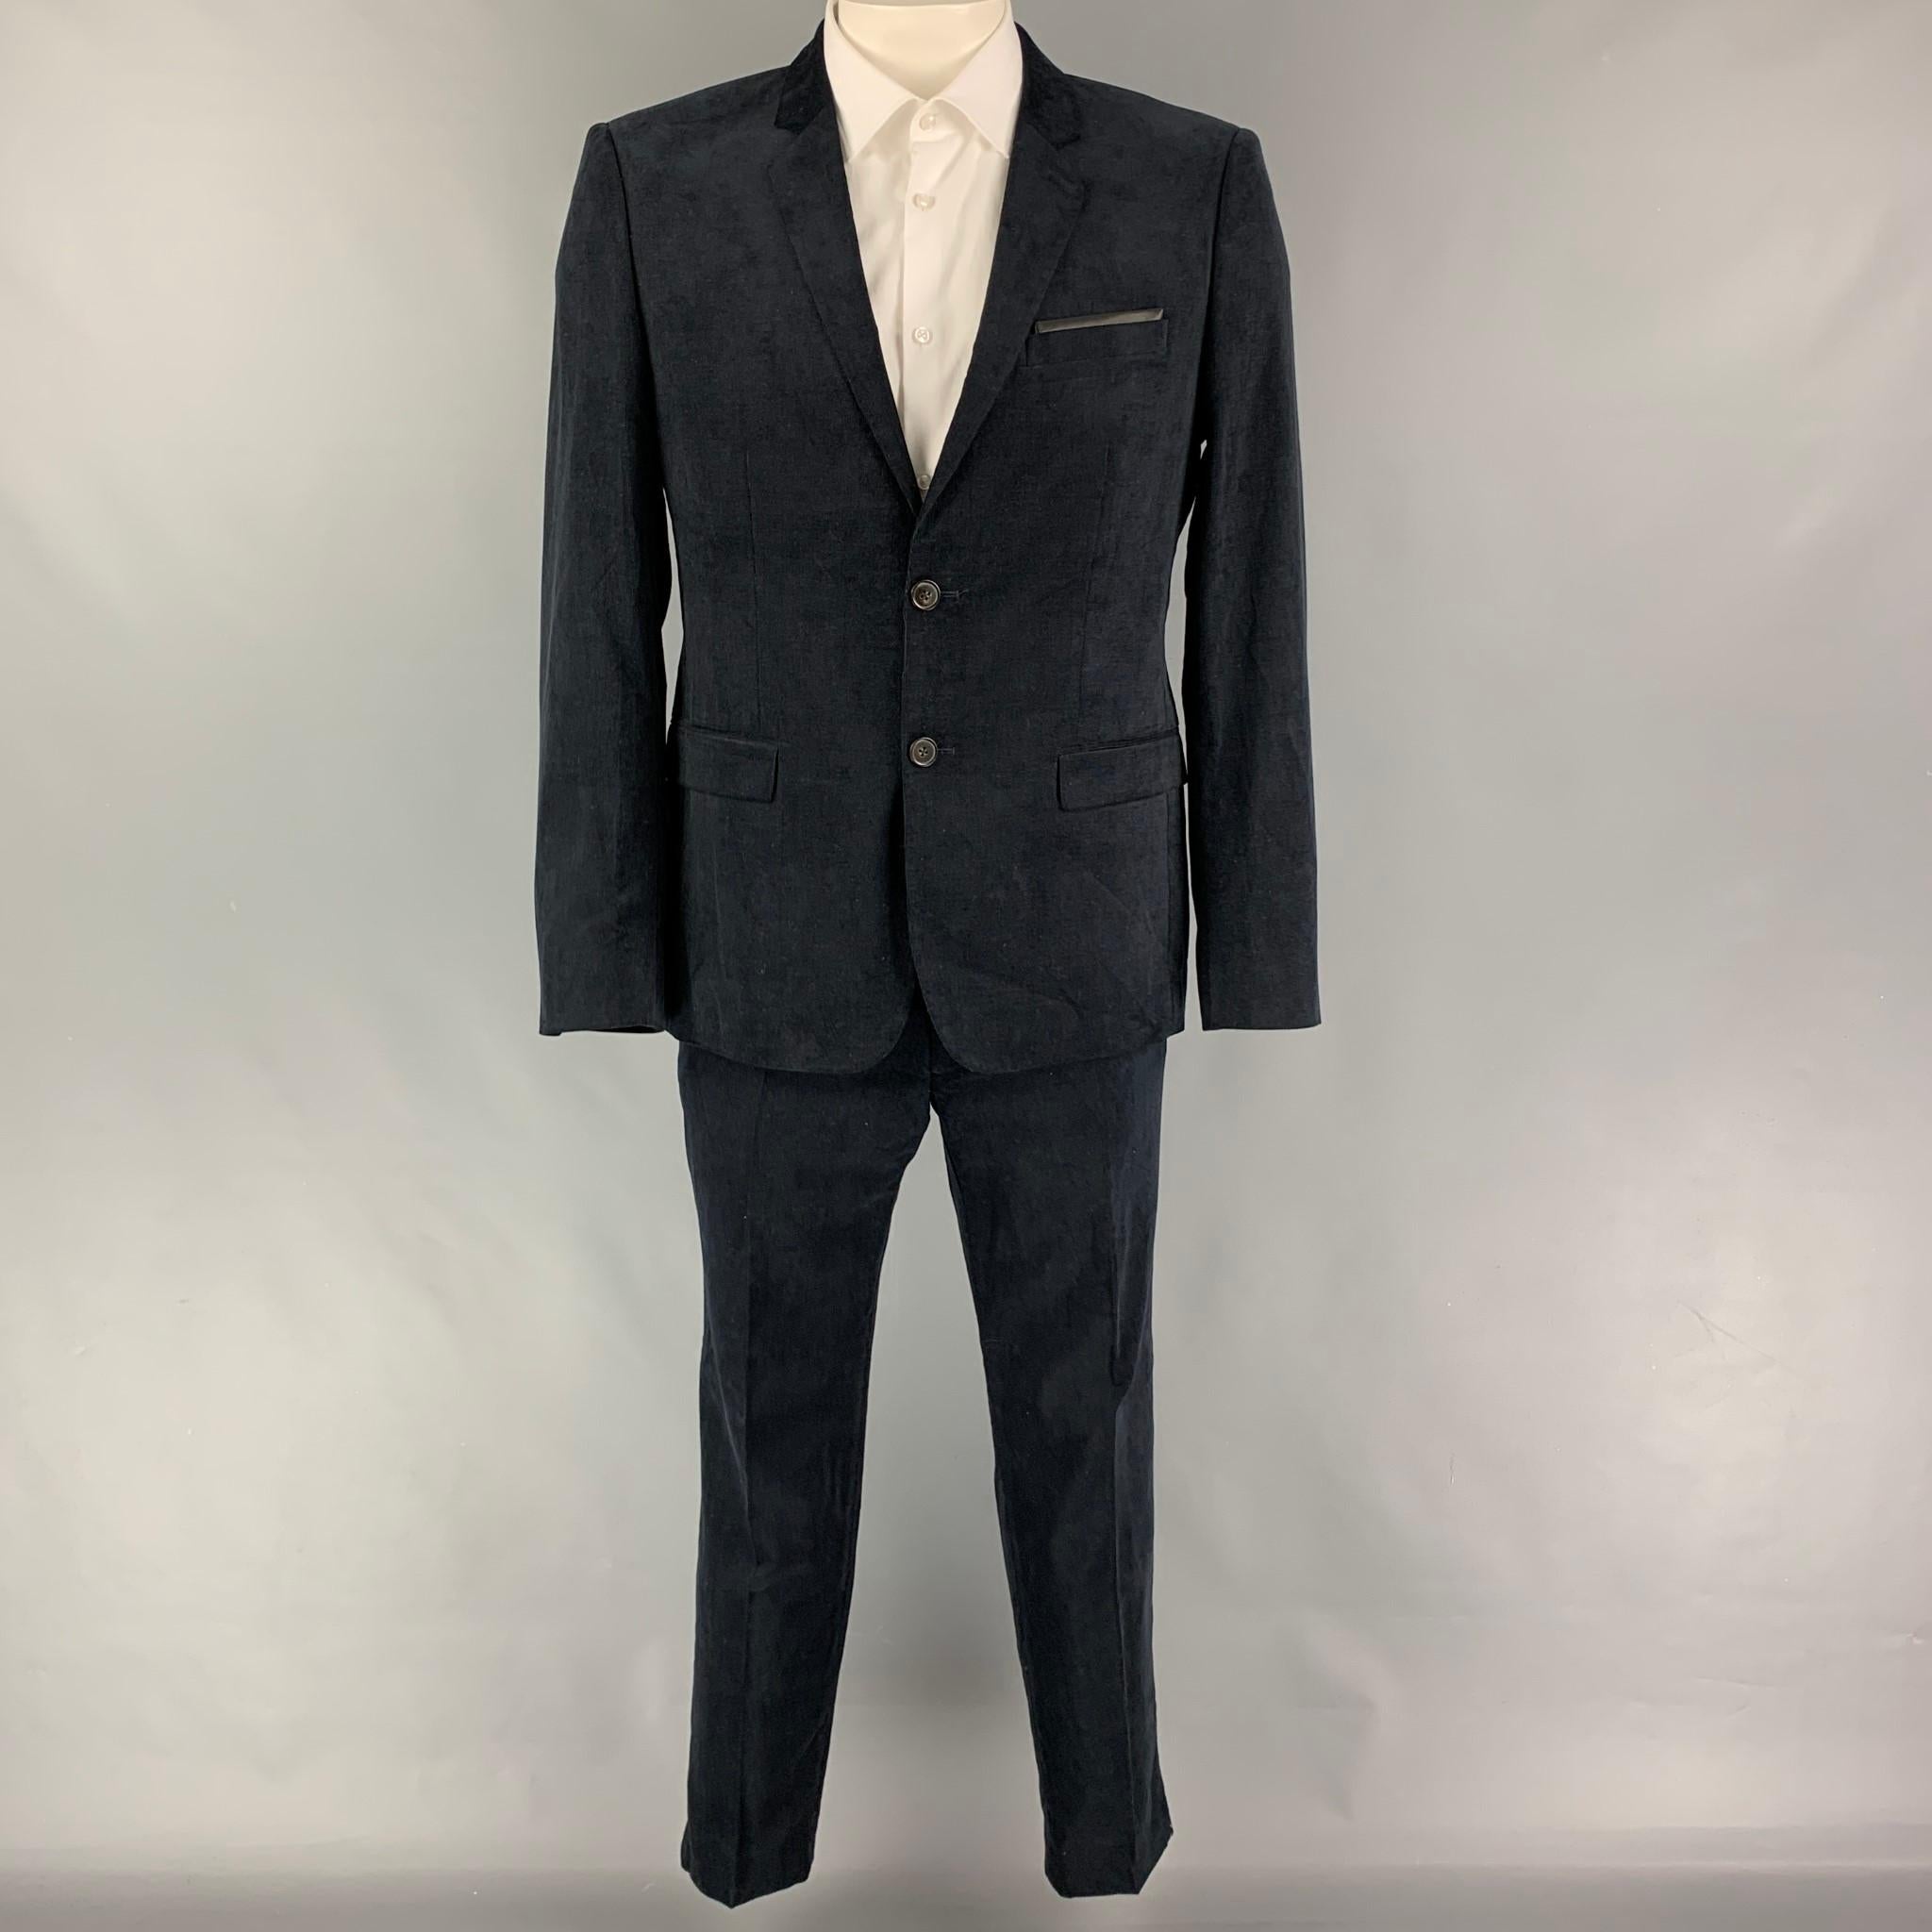 THE KOOPLES suit comes in a navy corduroy cotton with a full liner and includes a single breasted, double button sport coat with a notch lapel and matching flat front trousers. Includes tags.

Very Good Pre-Owned Condition.
Marked: 52
Original